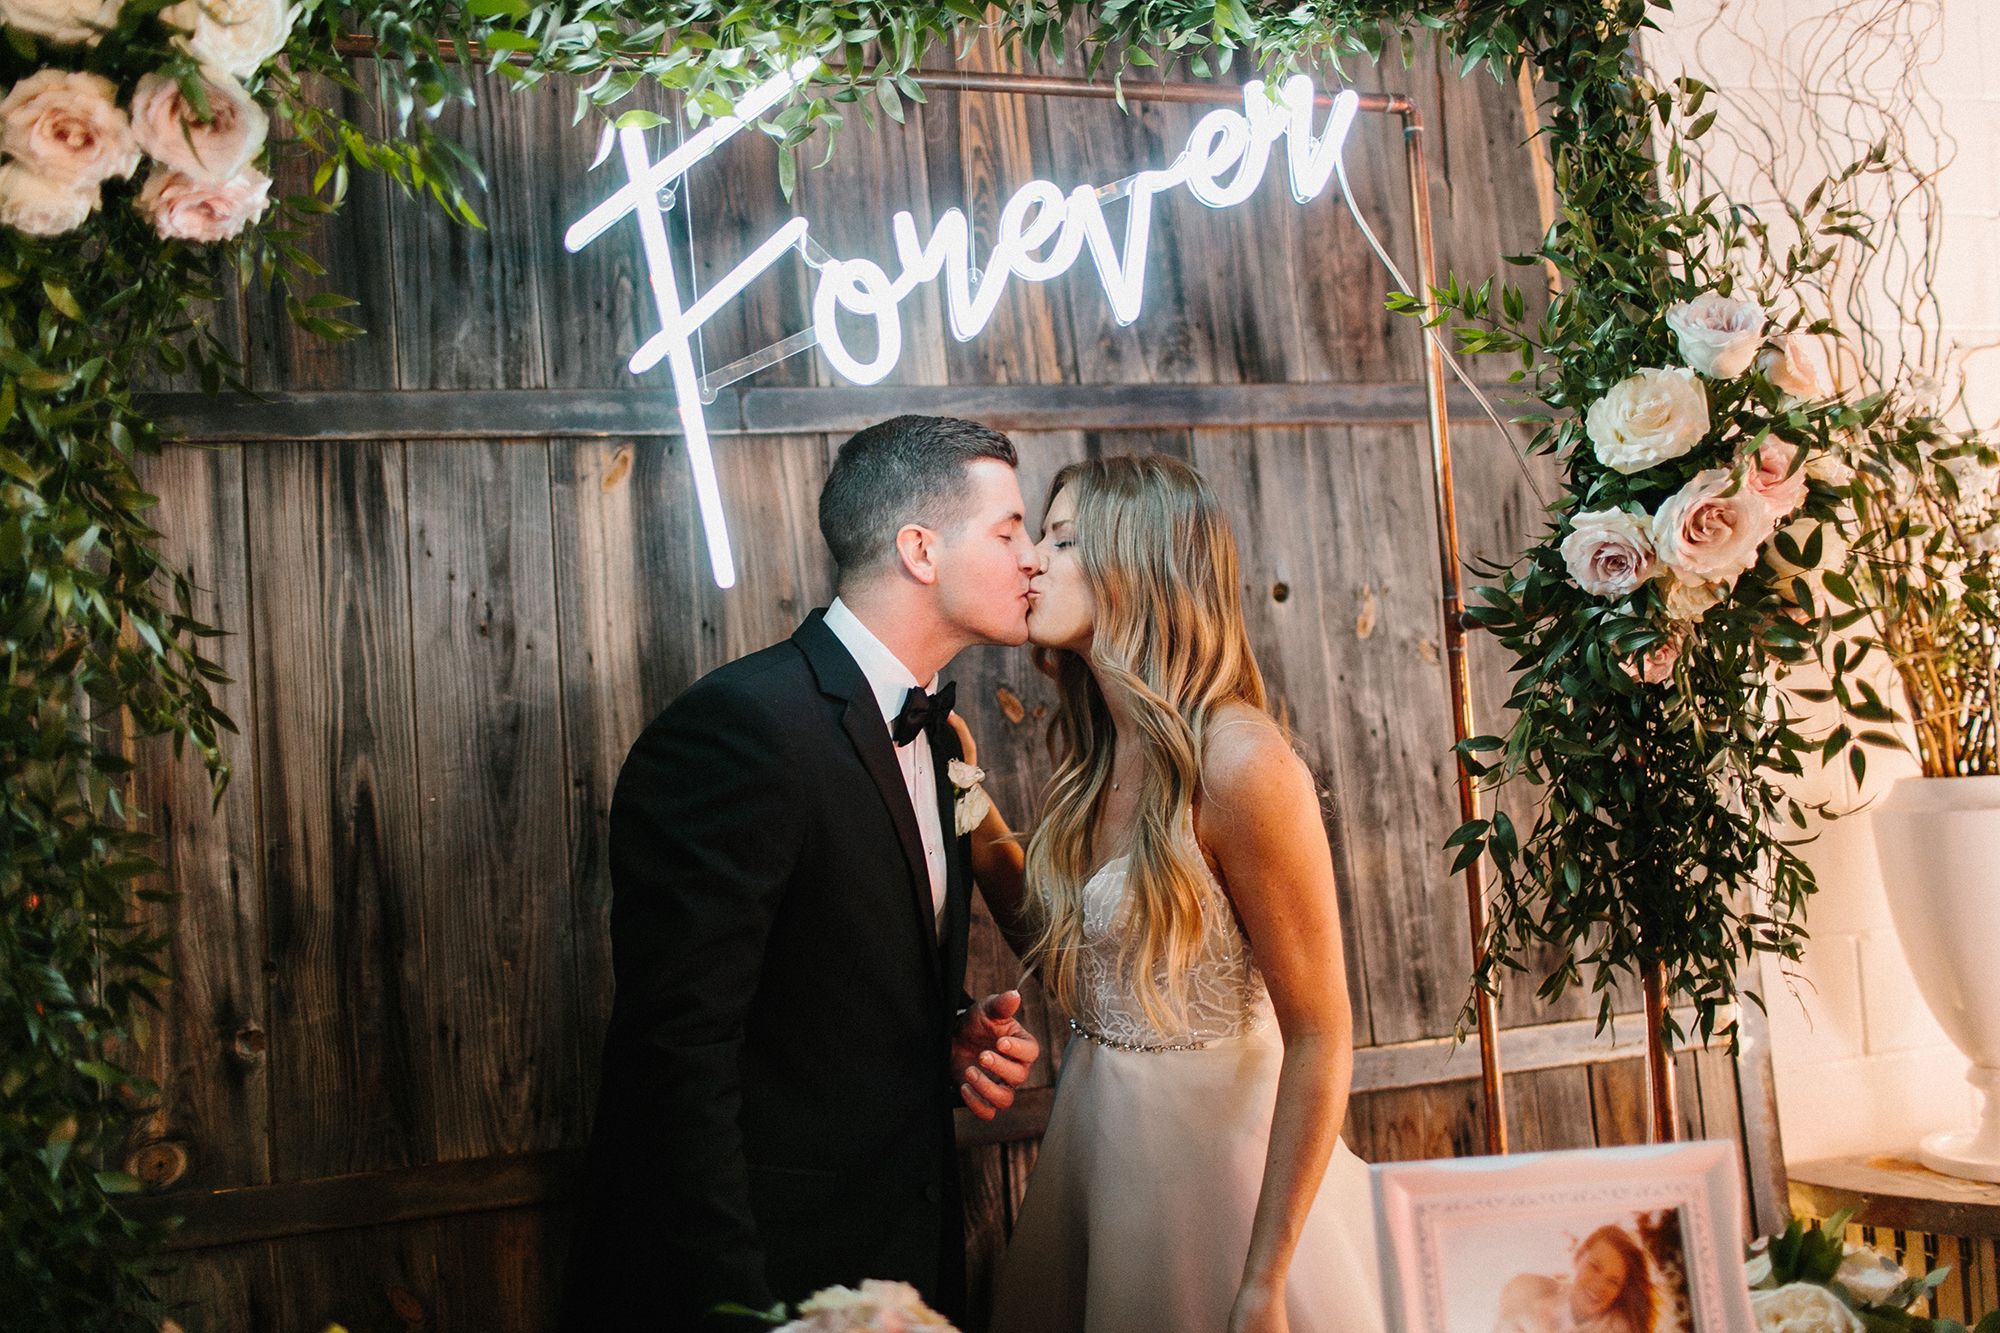 photo of a young bride and groom in a black tuxedo kissing under a neon sign that says forever